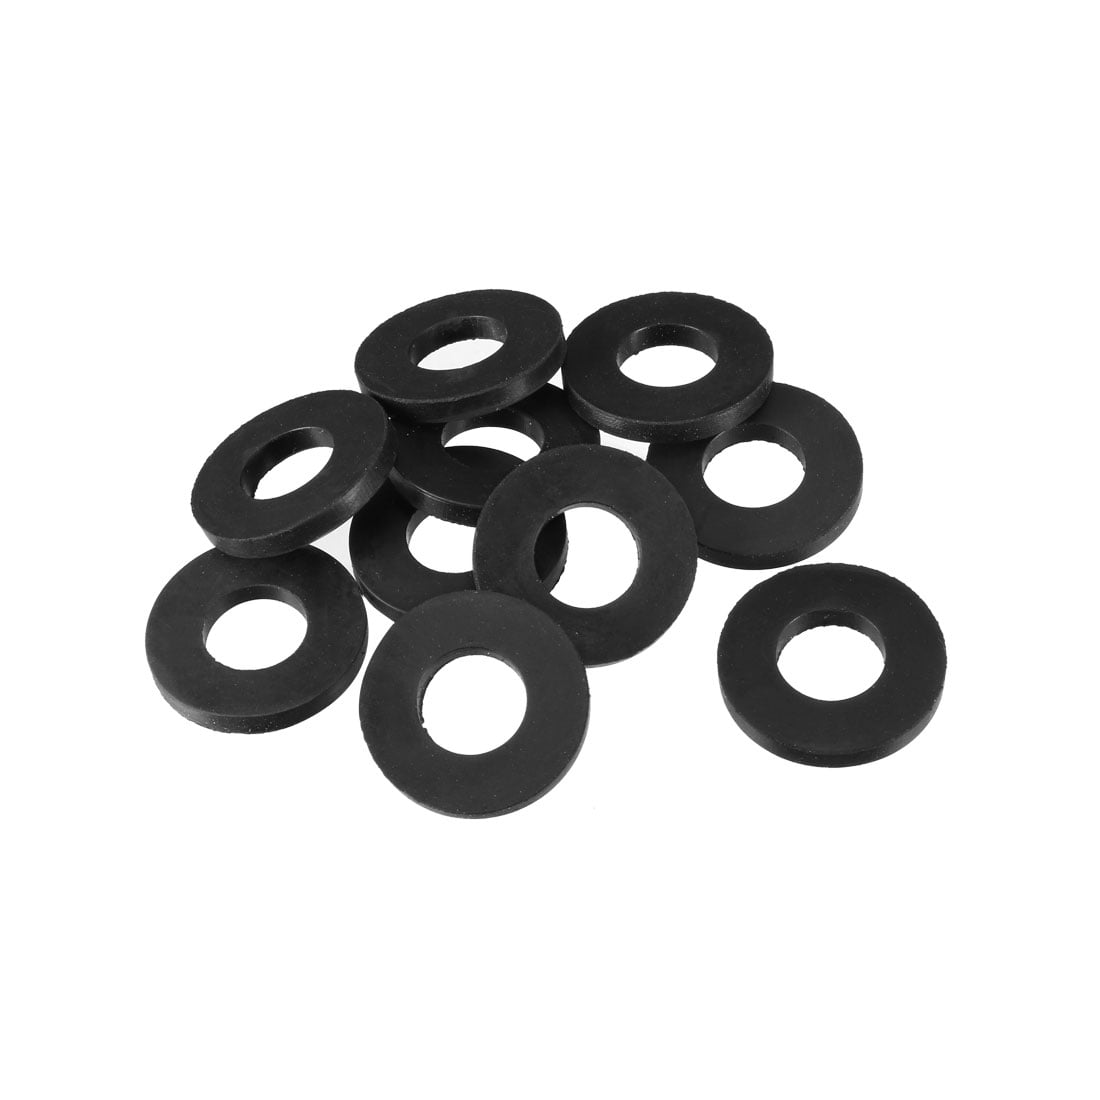 2 Pcs 60mm x 80mm x 3mm O-Ring Hose Gasket Silicone Washer 159A